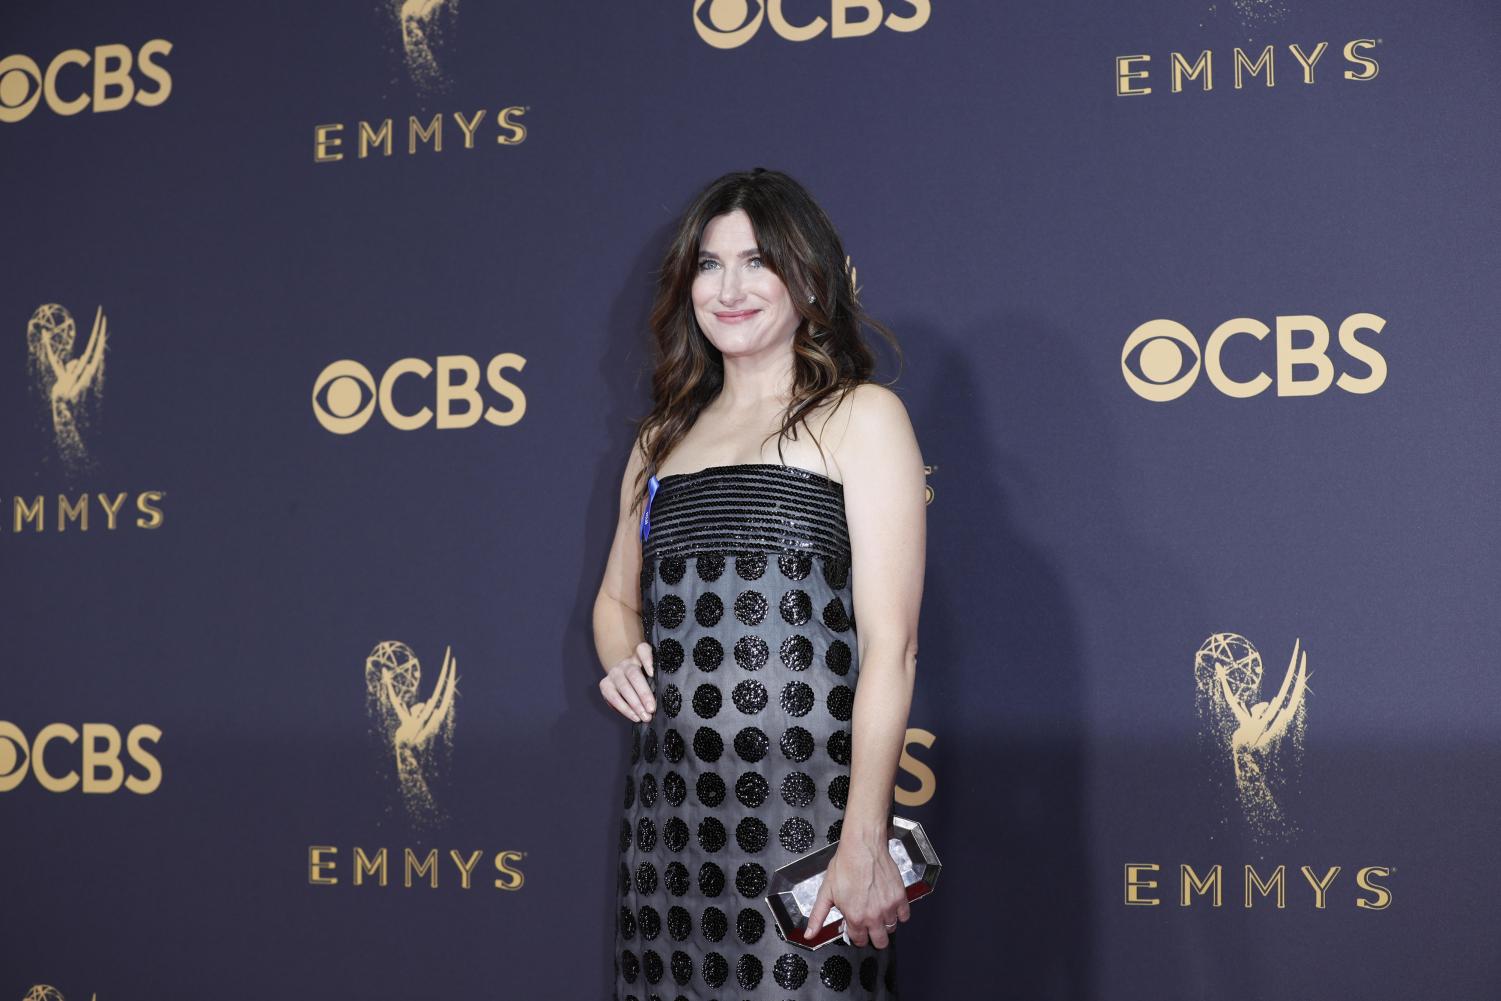 Actress+and+alumna+Kathryn+Hahn+stands+in+a+black+polka-dot+dress+in+front+of+a+navy+background+with+words+%E2%80%9CEmmys%E2%80%9D+and+%E2%80%9CCBS%E2%80%9D+in+gold.